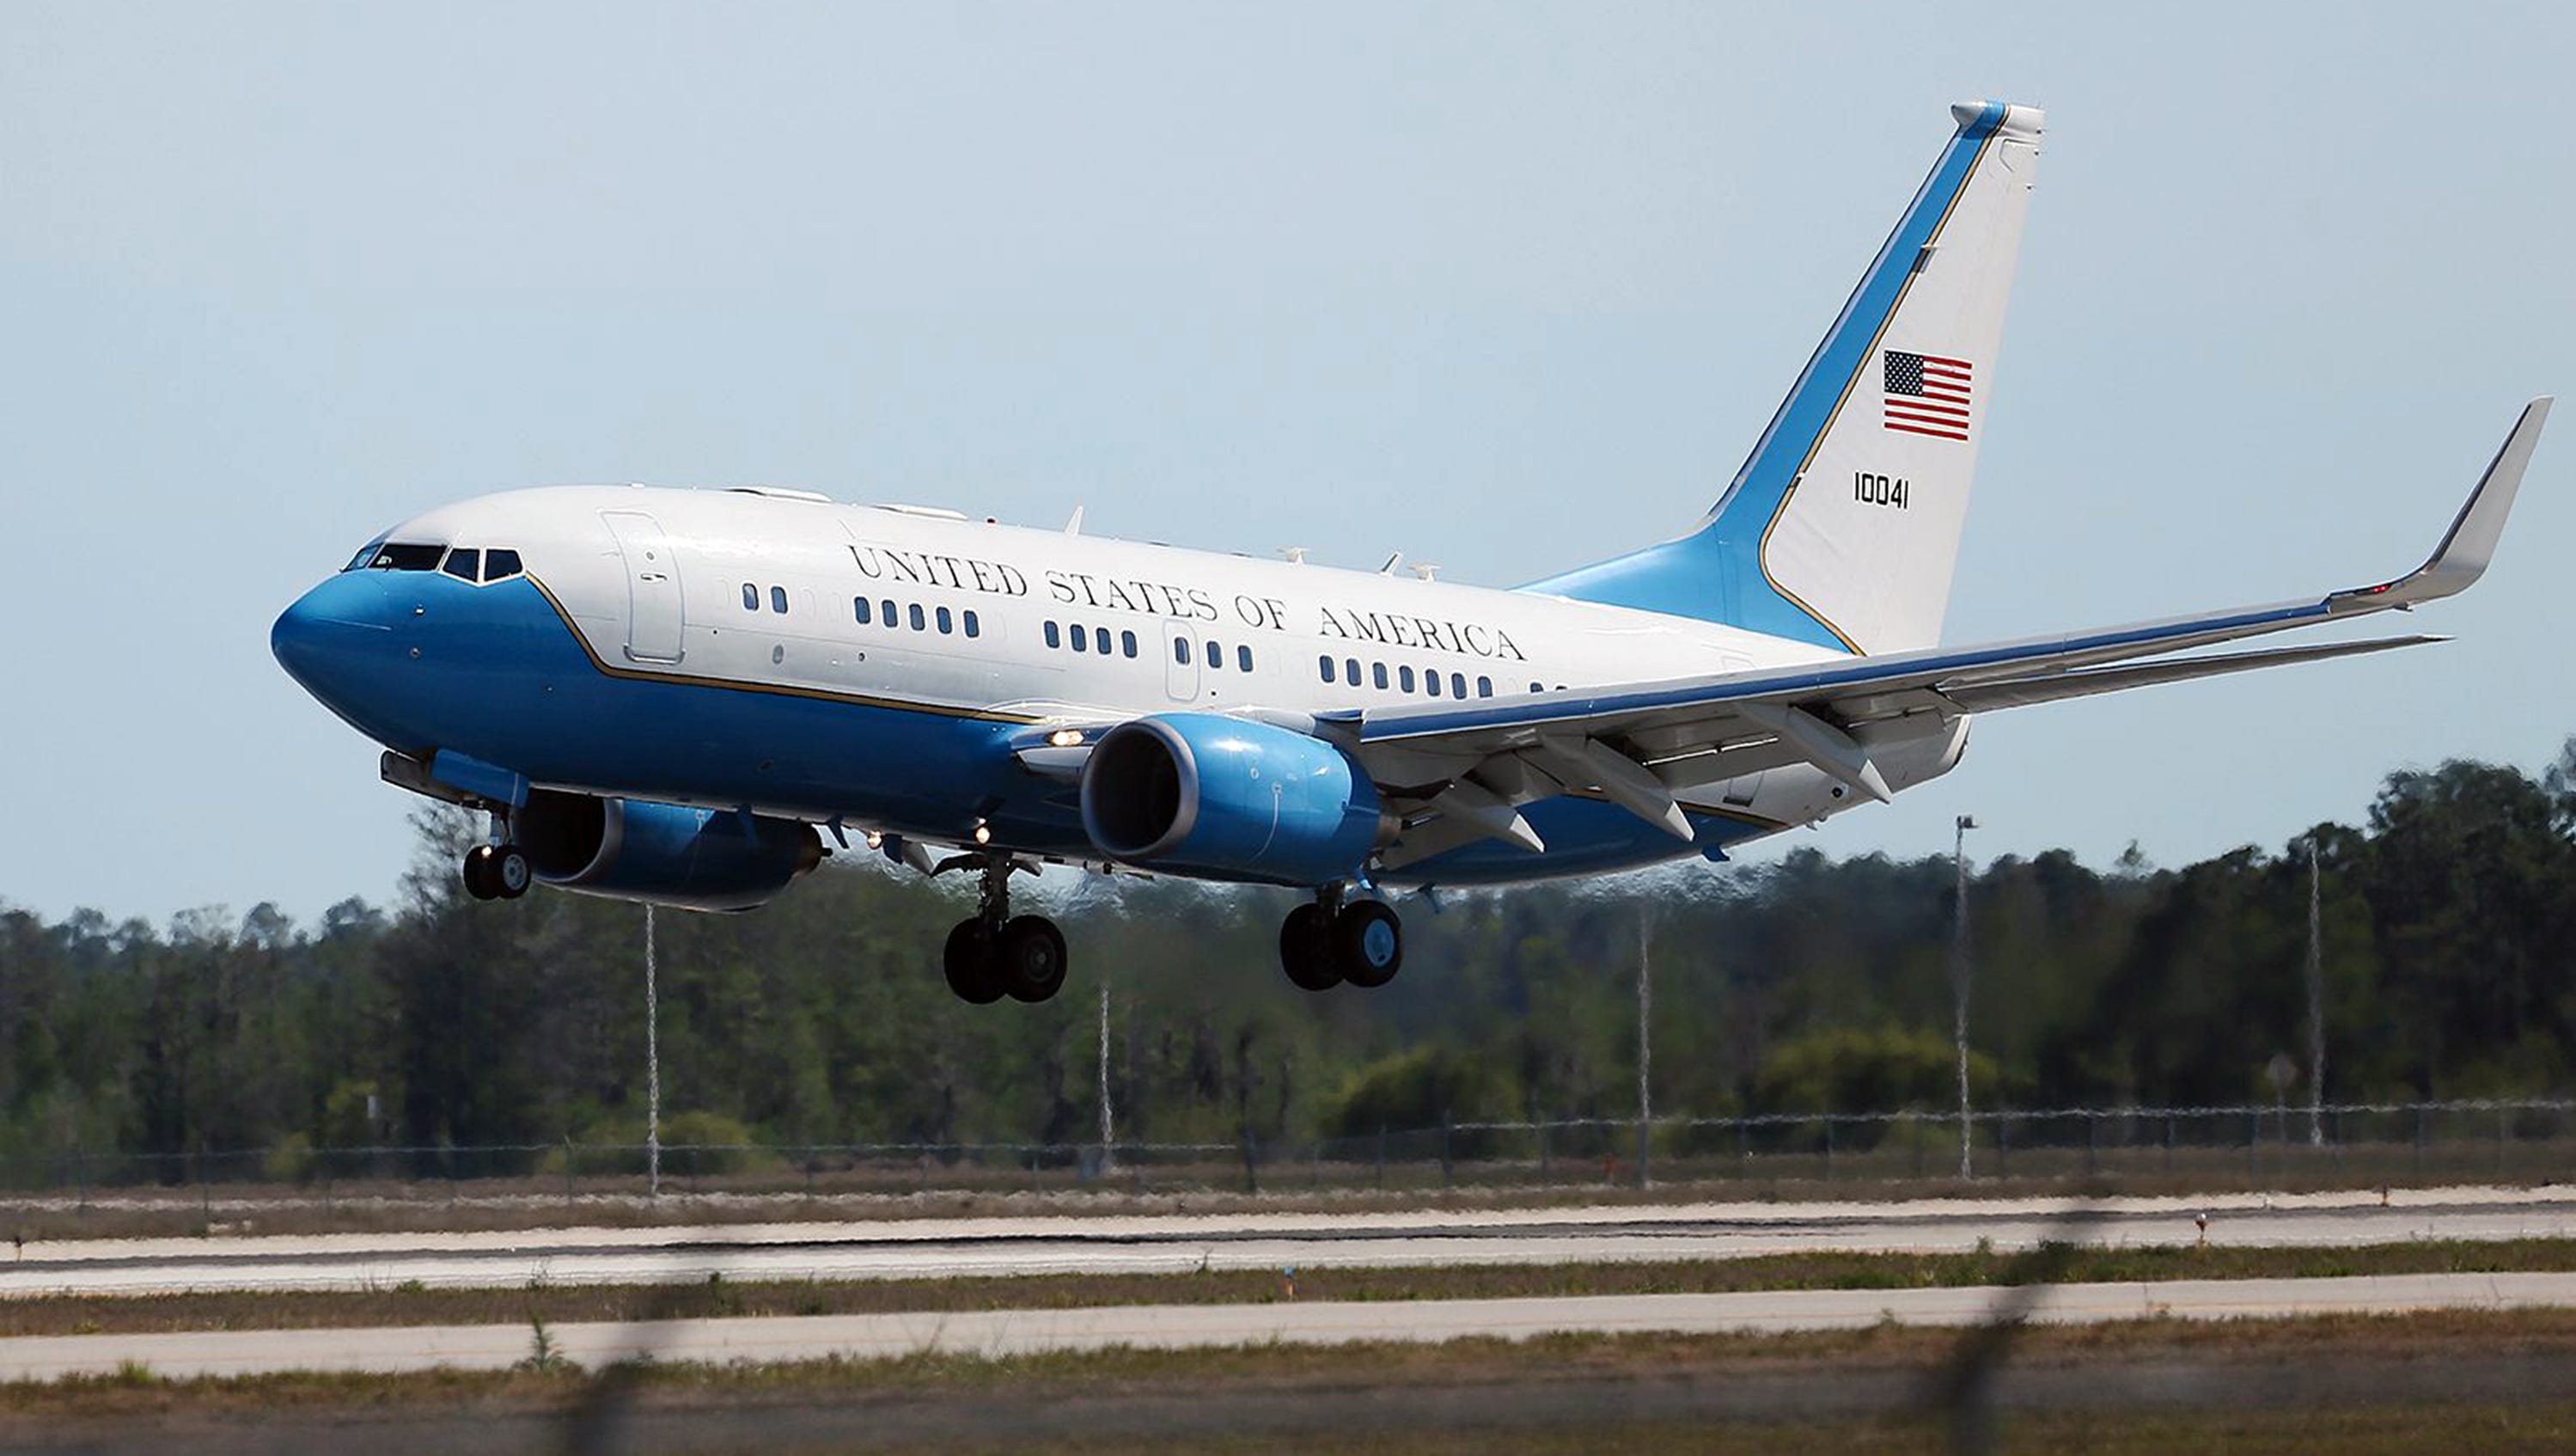 6 fun facts about Air Force Two